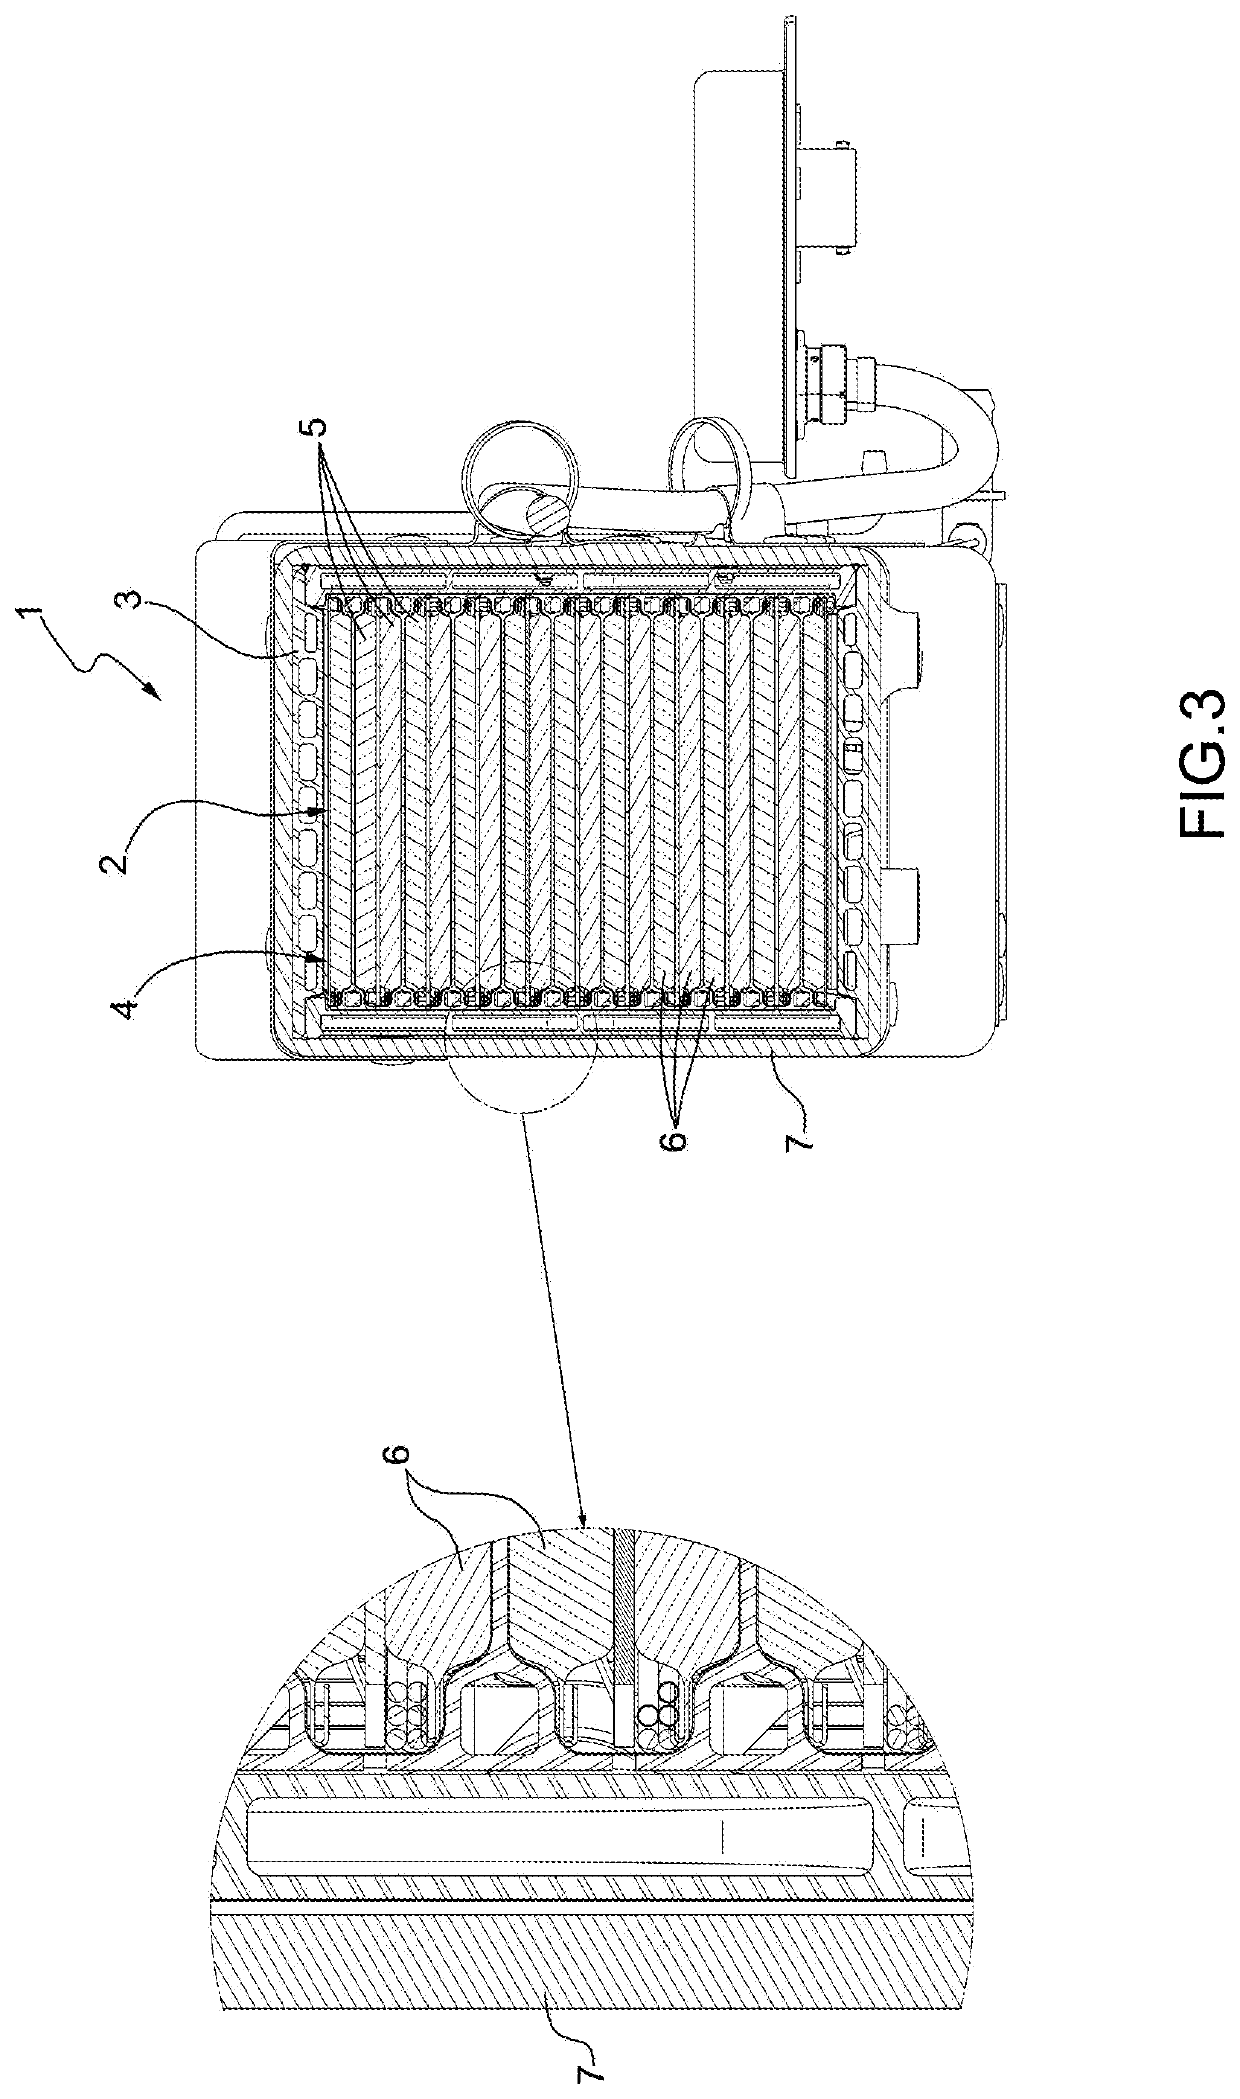 Power storage system for an electric drive vehicle